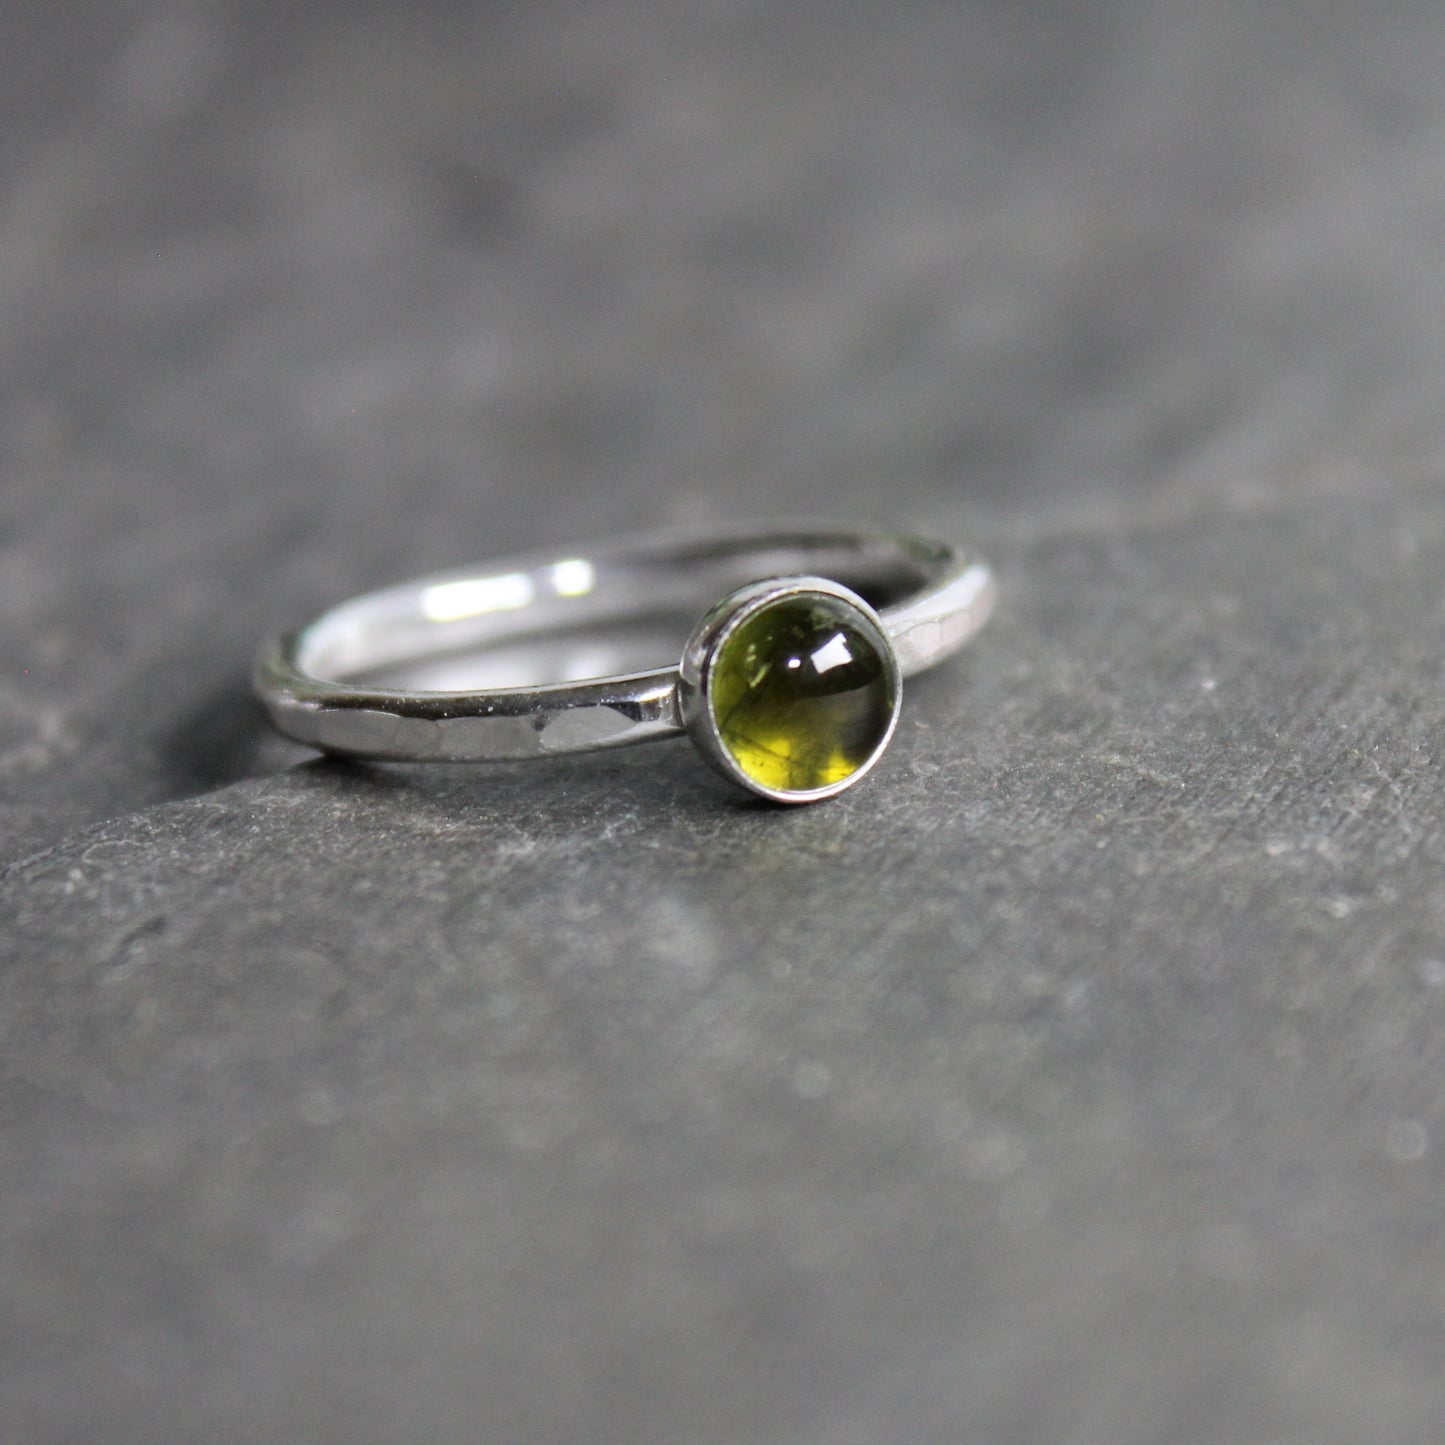 A Round 6mm green tourmaline gemstone set in a sterling silver bezel setting on a sturdy hammered band. 